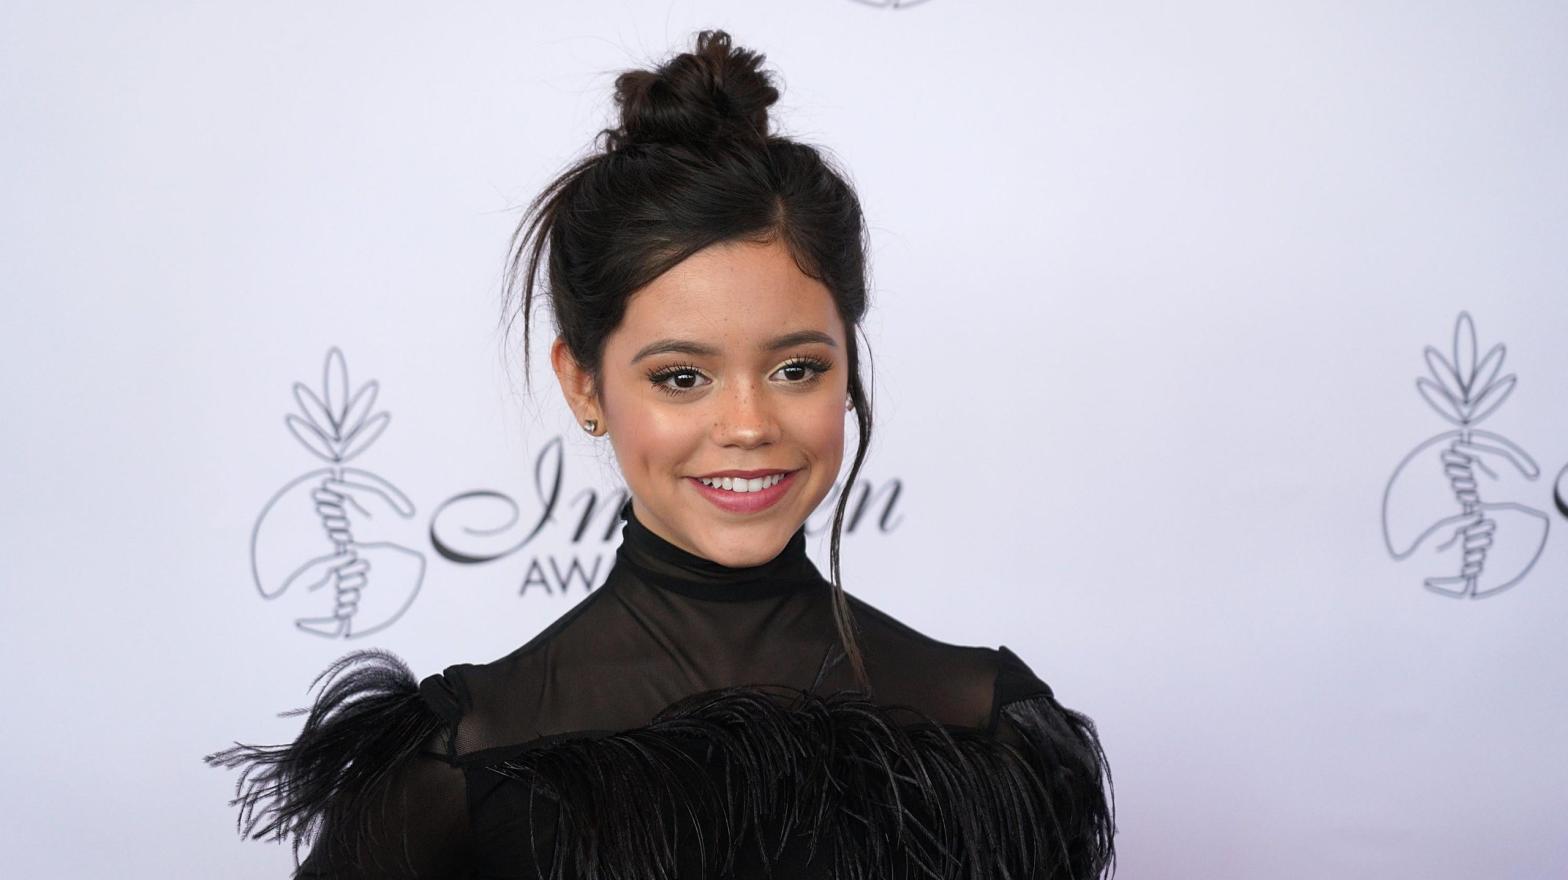 Jenna Ortega attends the 33rd Annual Imagen Awards on August 25, 2018 in Los Angeles, California. (Photo: JC Olivera, Getty Images)